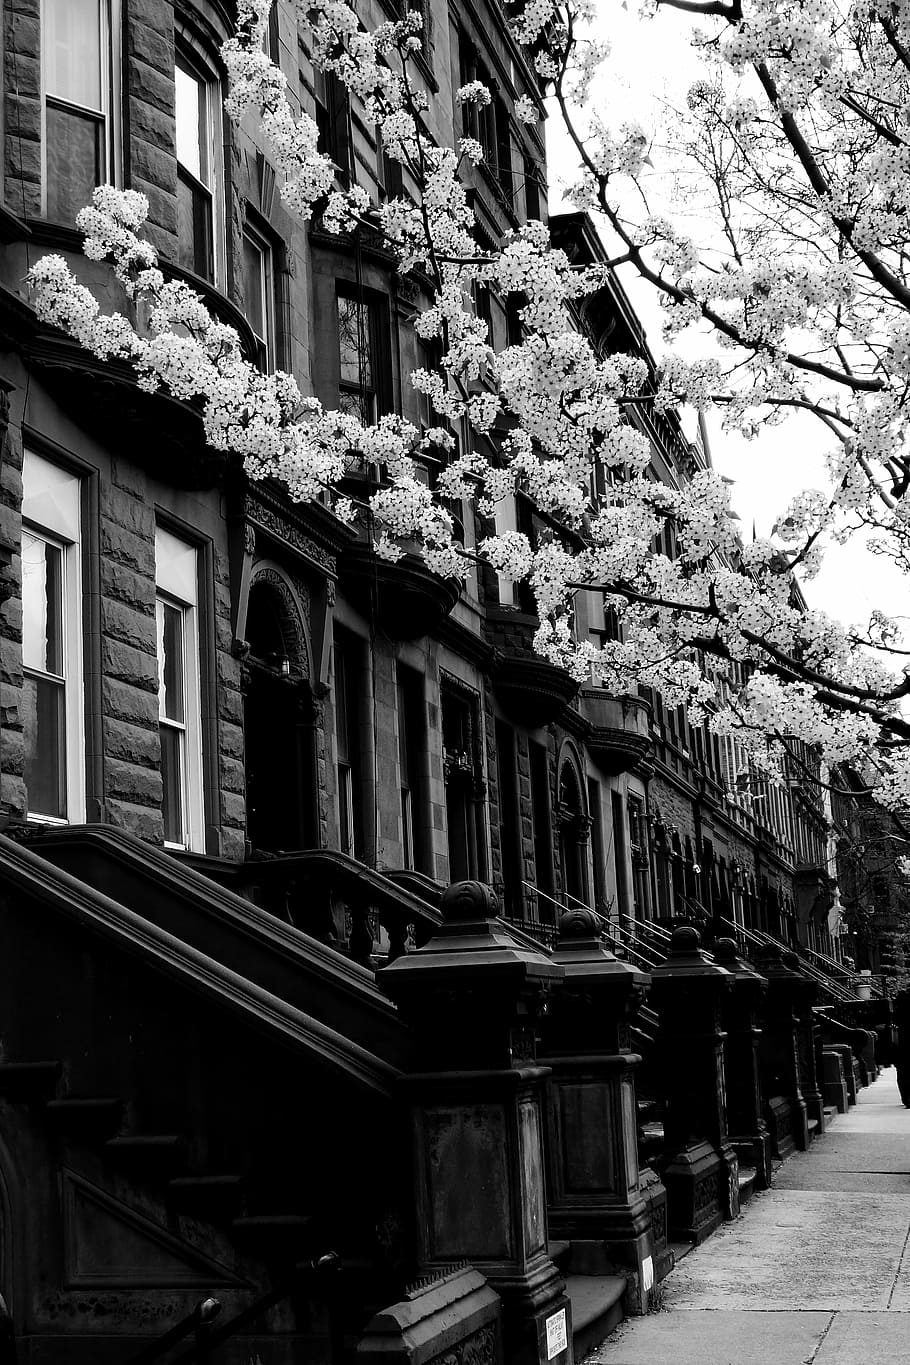 harlem, street, black and white, city, building, architecture, united states, new york, spring, perspective